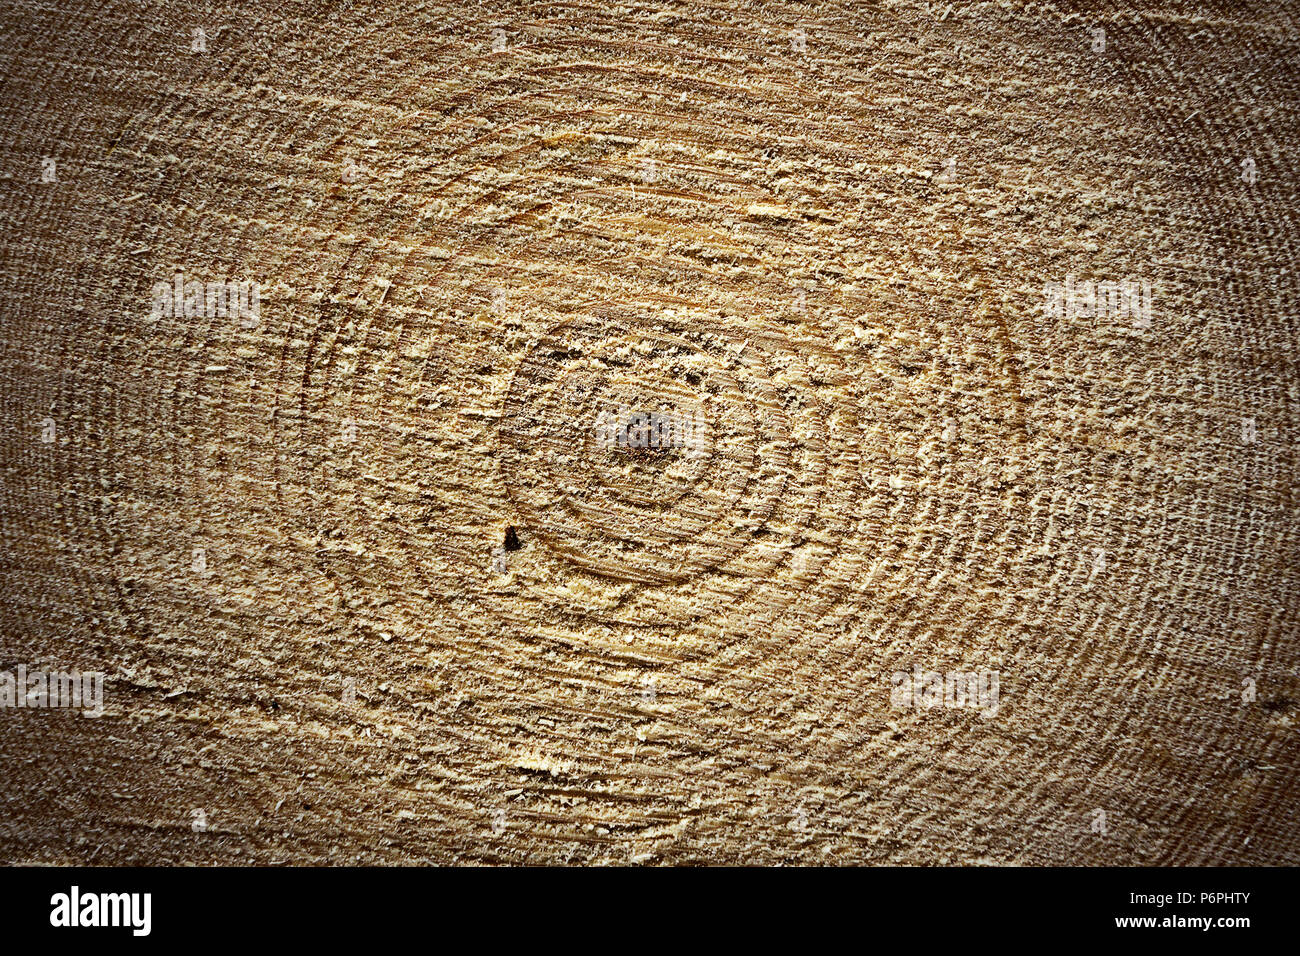 surface of cross section, spruce log, wooden texture of Picea abies showing annual rings Stock Photo